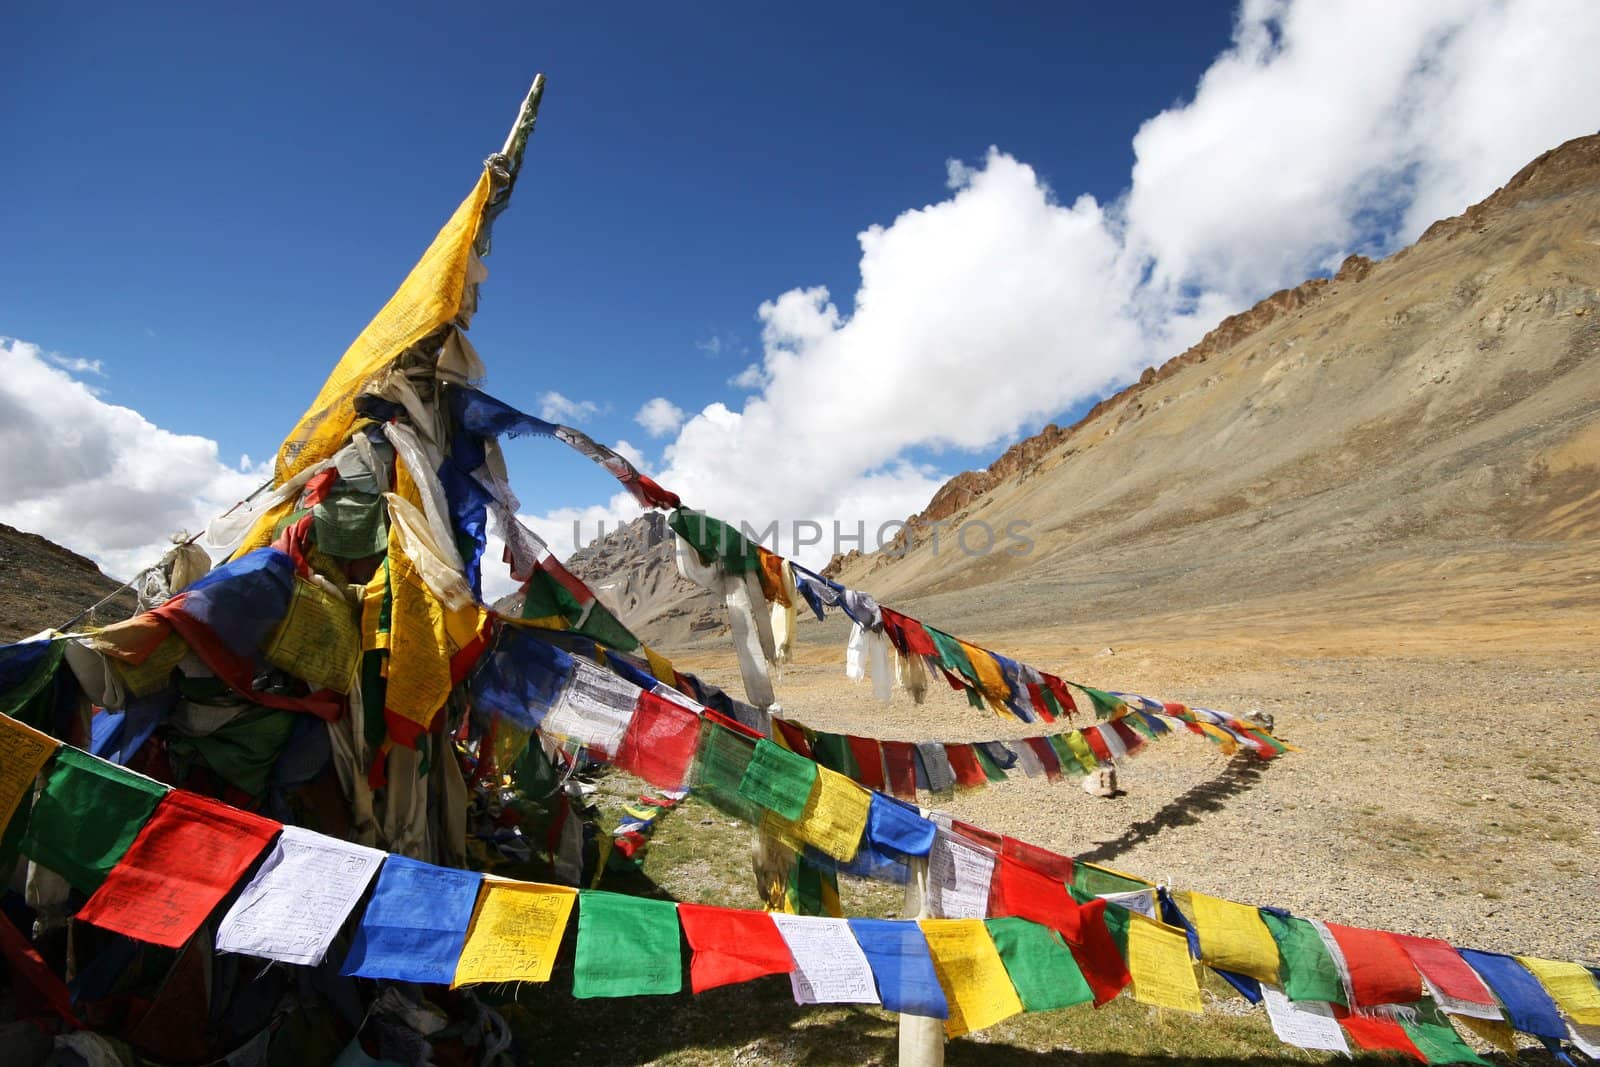 Plenty of colorful Buddhist prayer flags on the road between Leh and Manali